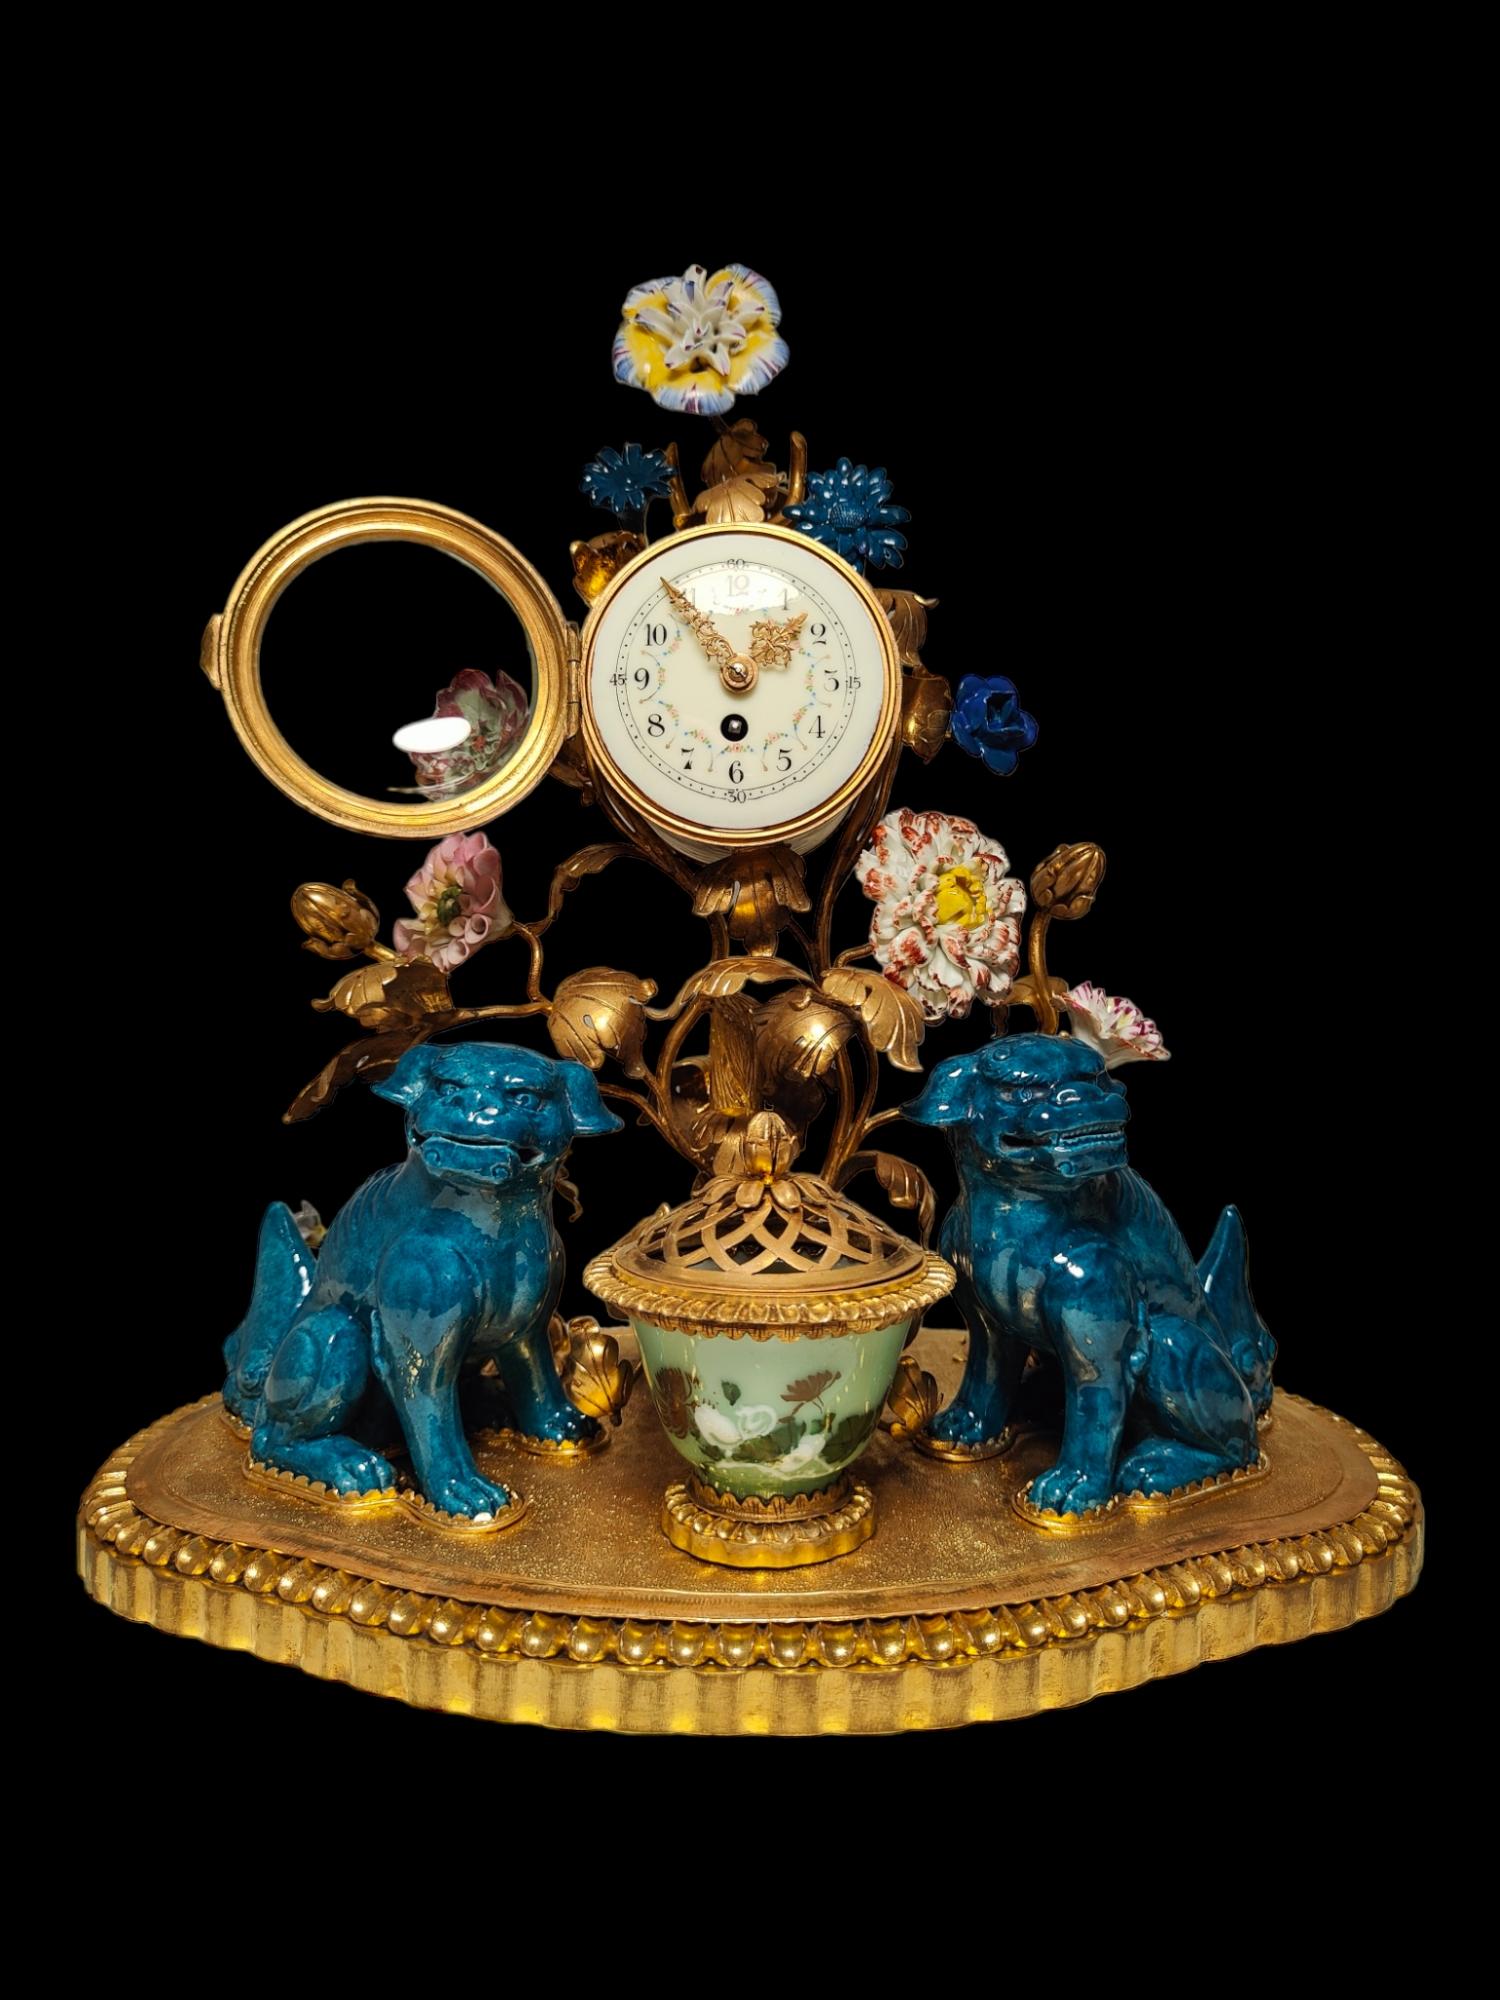 Chinosoiserie style gilt bronze and porcelain clock.
The misnamed ‘kylins’ of the time-honoured title of this clock are the pair of squatting lions of turquoise- and purple-glazed porcelain from the first half of the 19th century which flank the